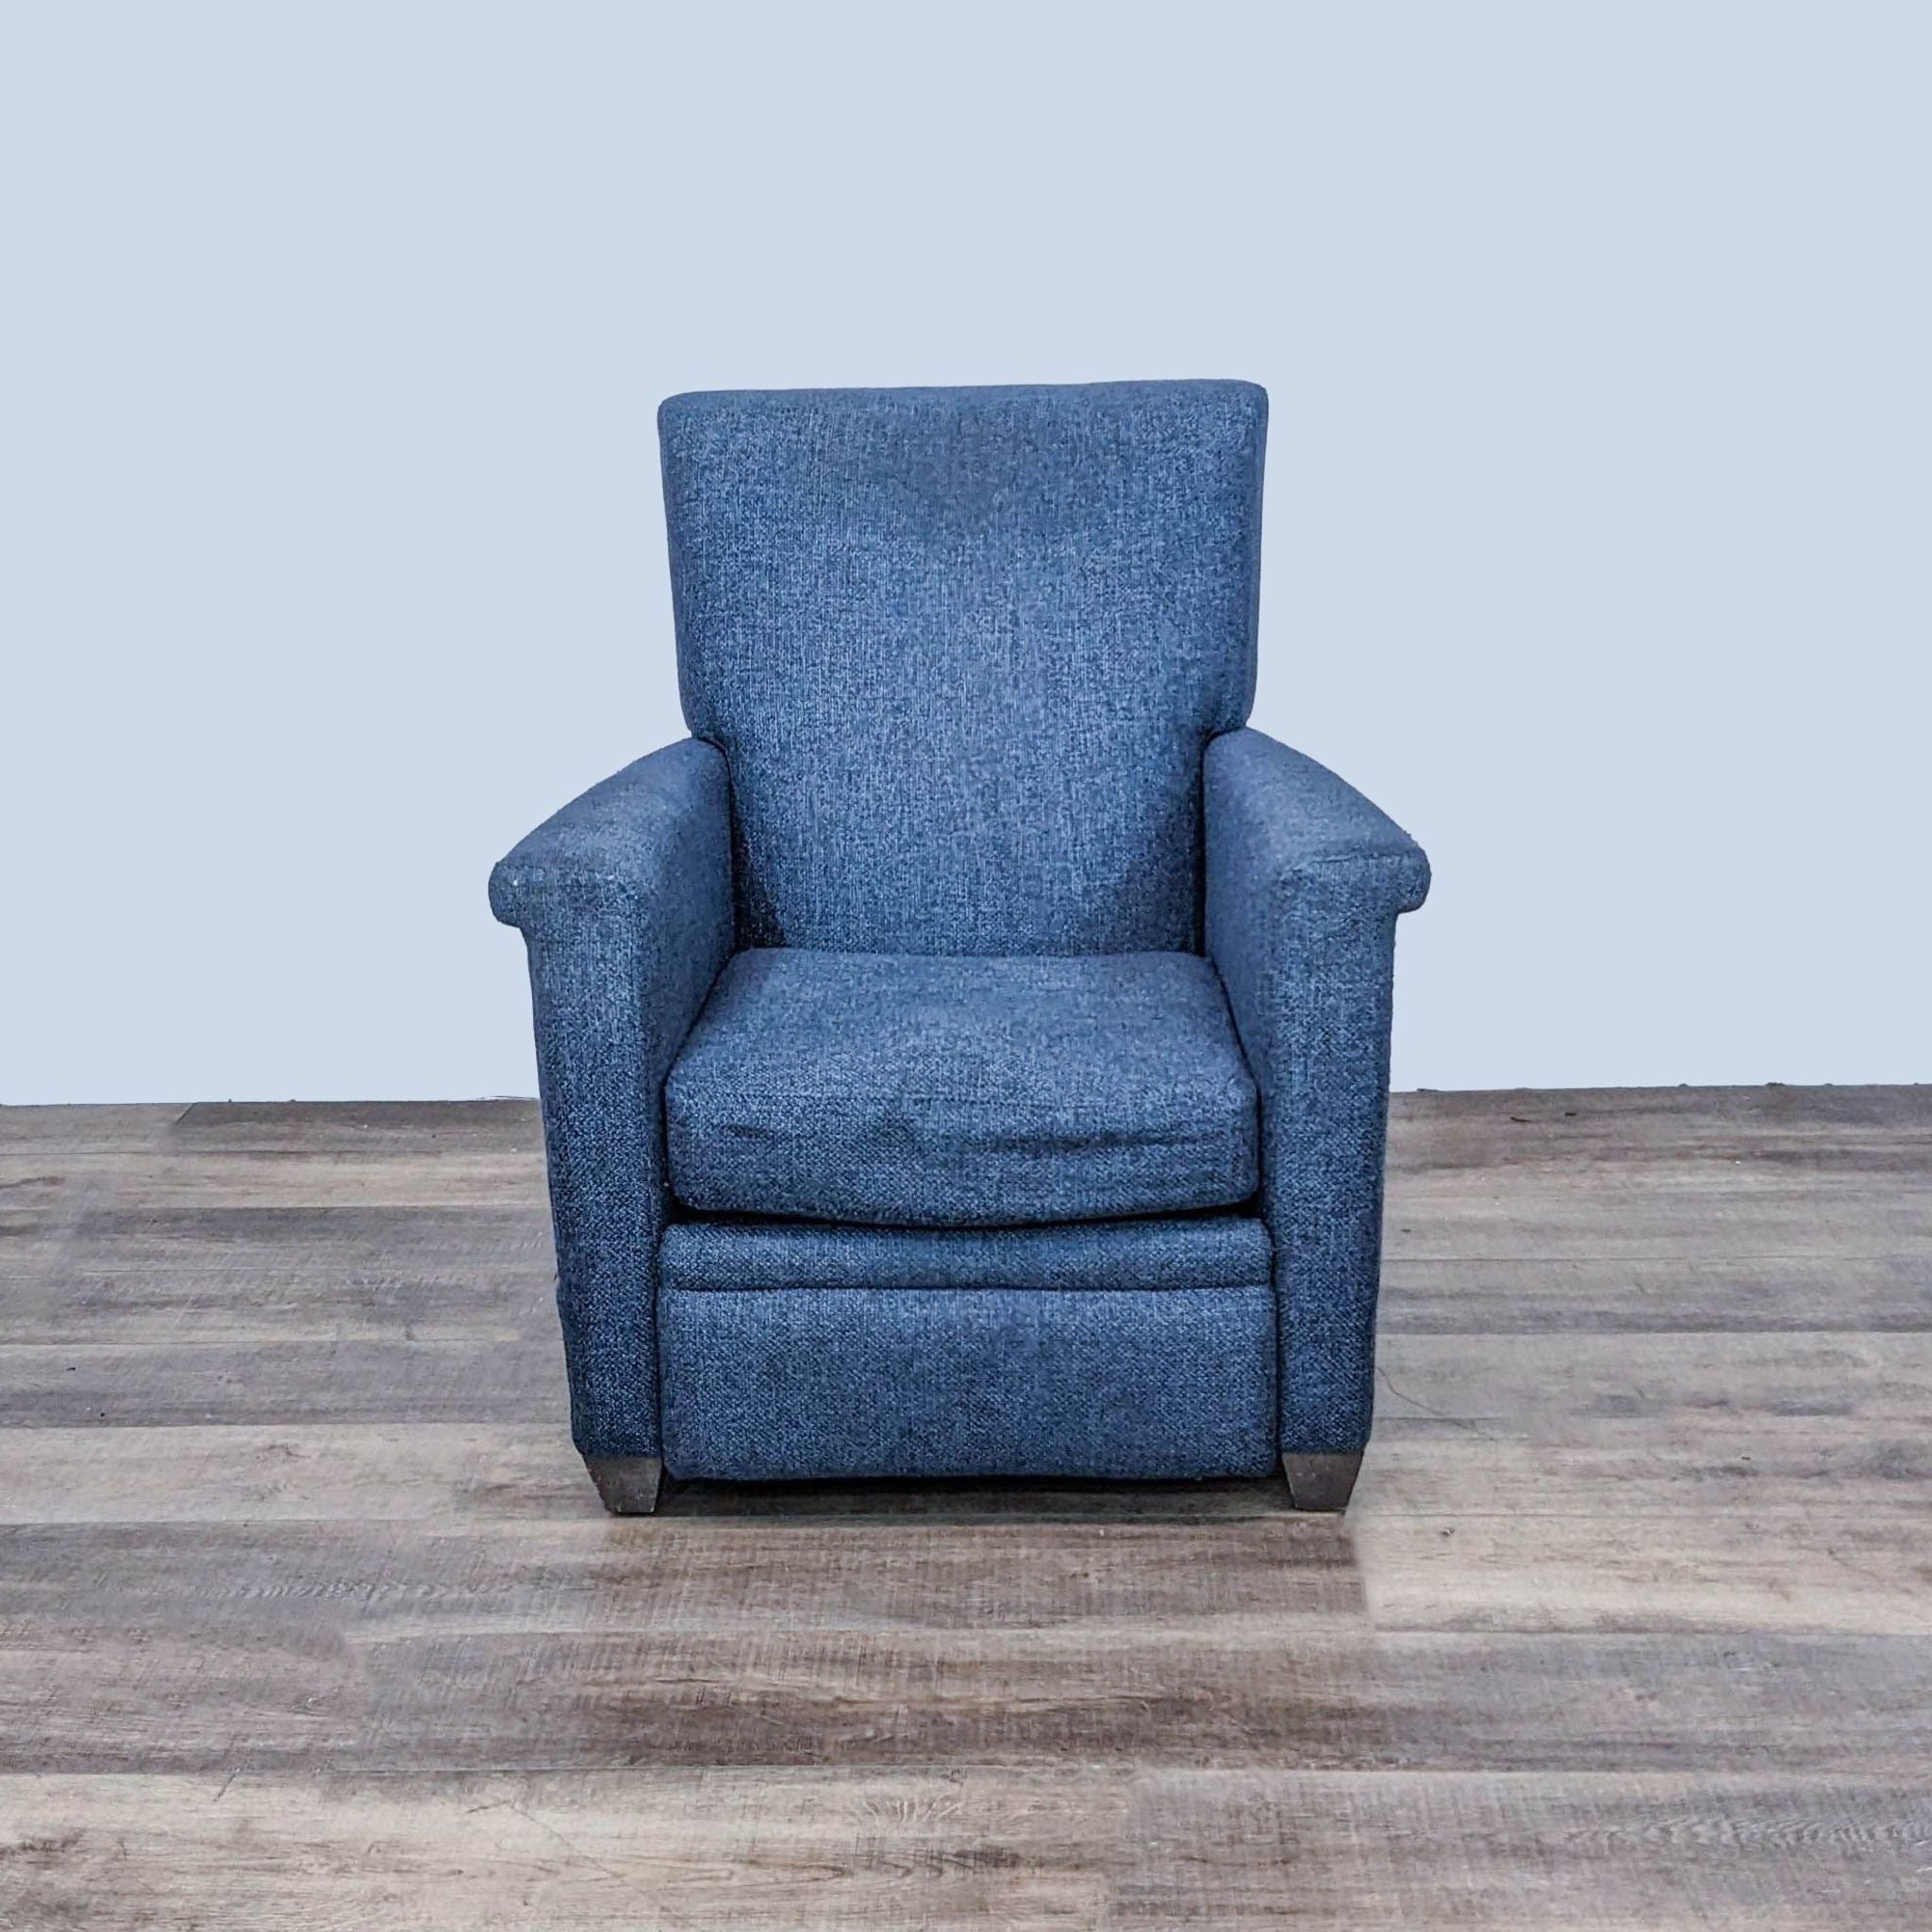 Comfortable Crate & Barrel Declan manual recliner in upright position with sturdy frame and blue upholstery.